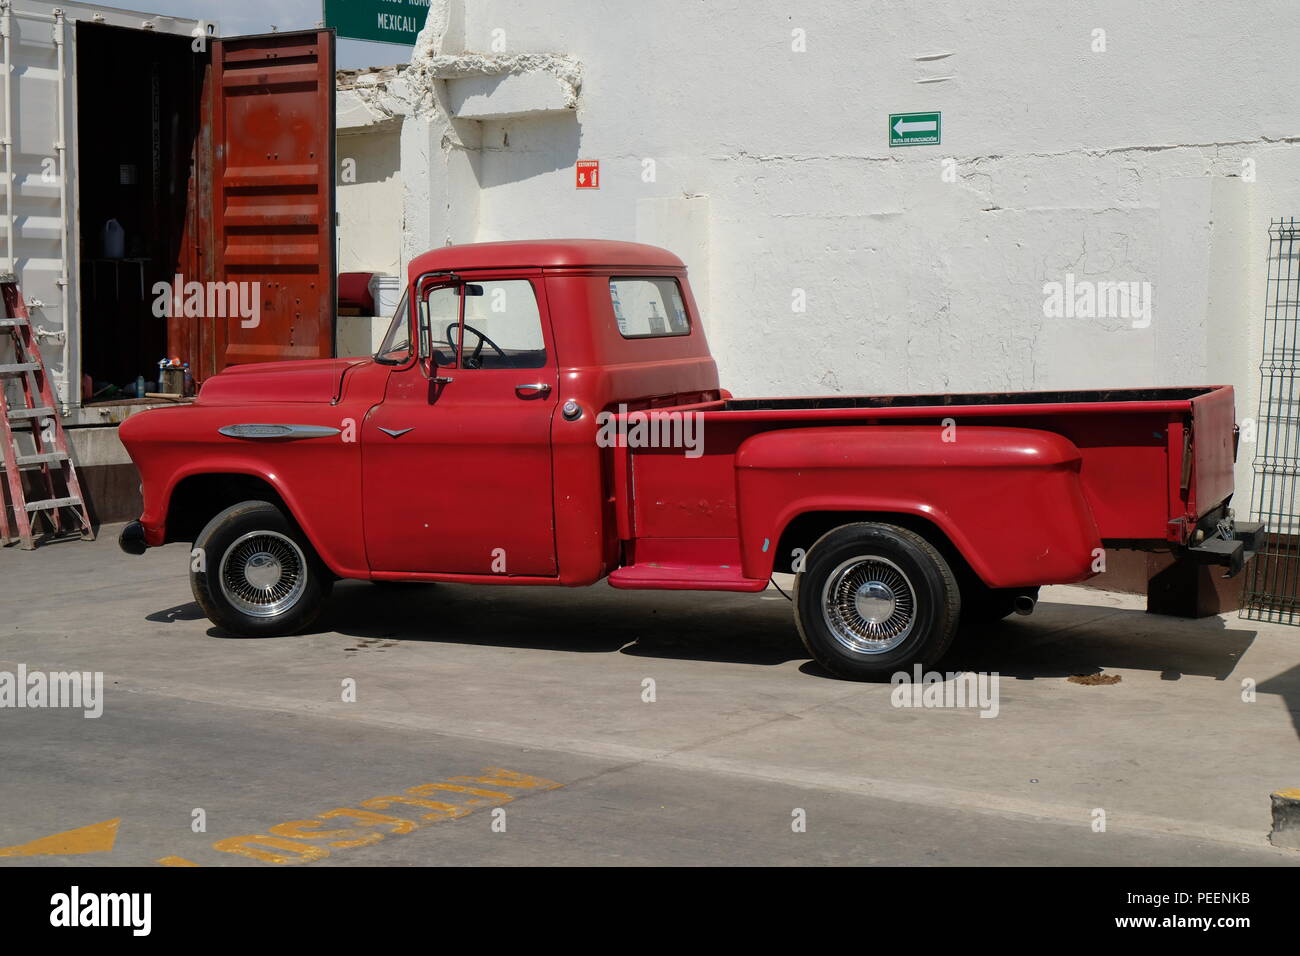 1957 Red Chevy Side Step Pickup Truck, Tecate, Baja California, Mexico. Stock Photo